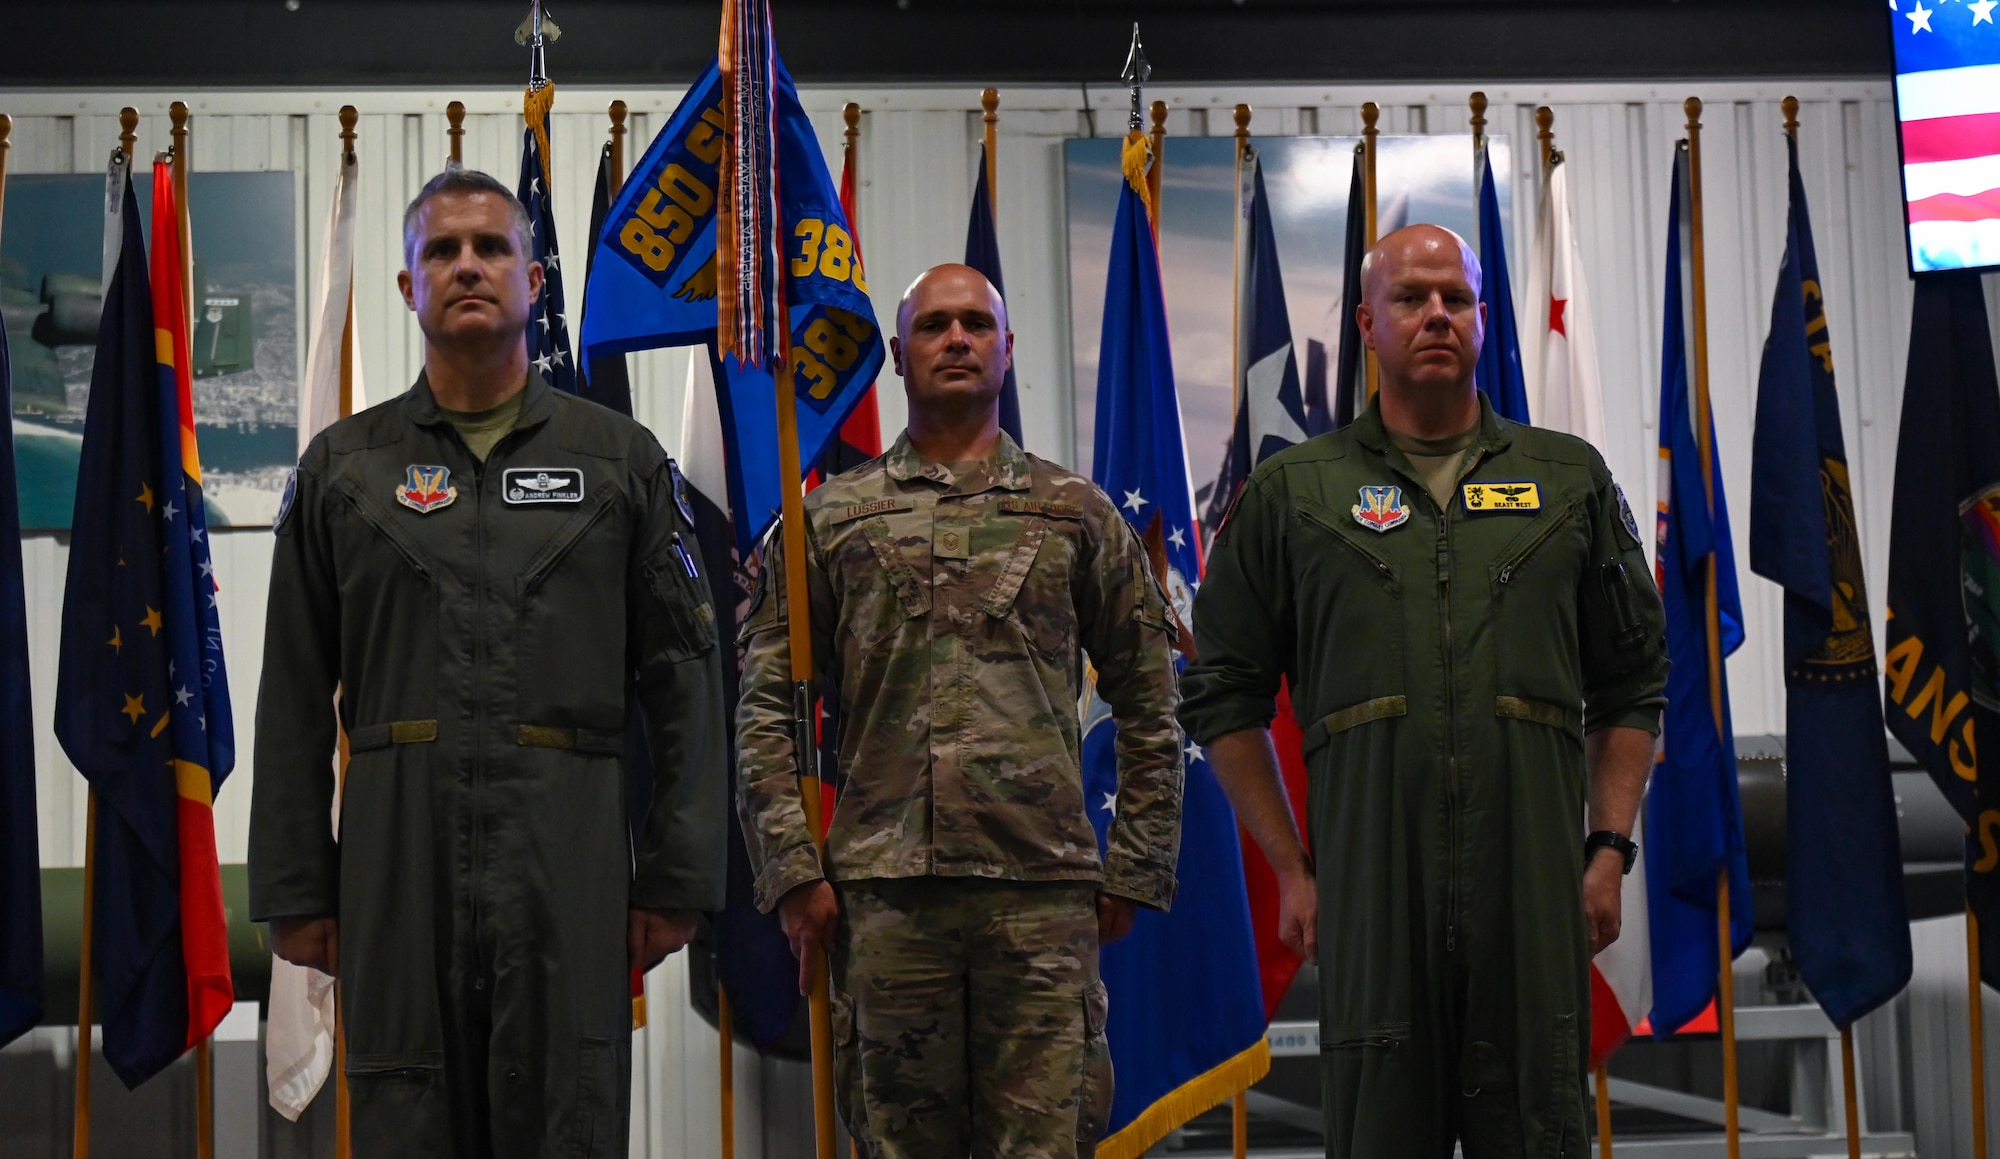 U.S. Air Force Col. Andrew Finkler, 850th Spectrum Warfare Group commander, left, Master Sgt. Tyler Lussier, 388th Electronic Warfare Squadron senior enlisted leader, center, and Lt. Col. Timothy West, 388th EWS commander, right, participate in a reactivation ceremony and assumption of command at the U.S. Air Force Armament Museum, Eglin Air Force Base, Florida, May 2, 2024. The 388th EWS previously served as the 388th Electronic Combat Squadron and operated the EA-6B Growler, before being deactivated in 2010. (U.S. Air Force photo by Capt. Benjamin Aronson)